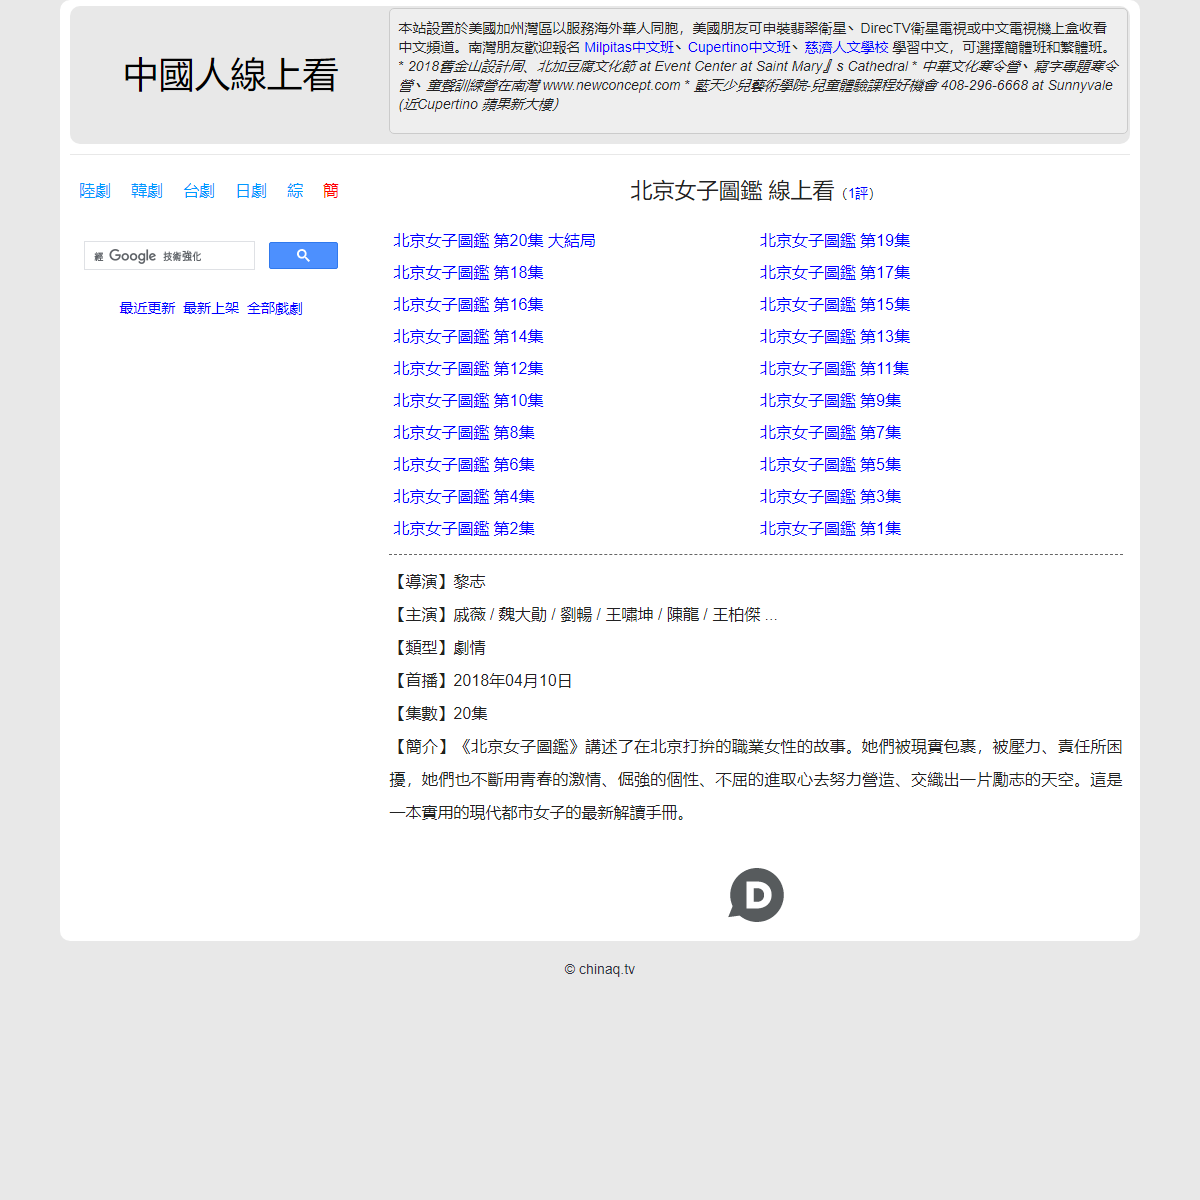 A complete backup of https://chinaq.tv/cn180410d/